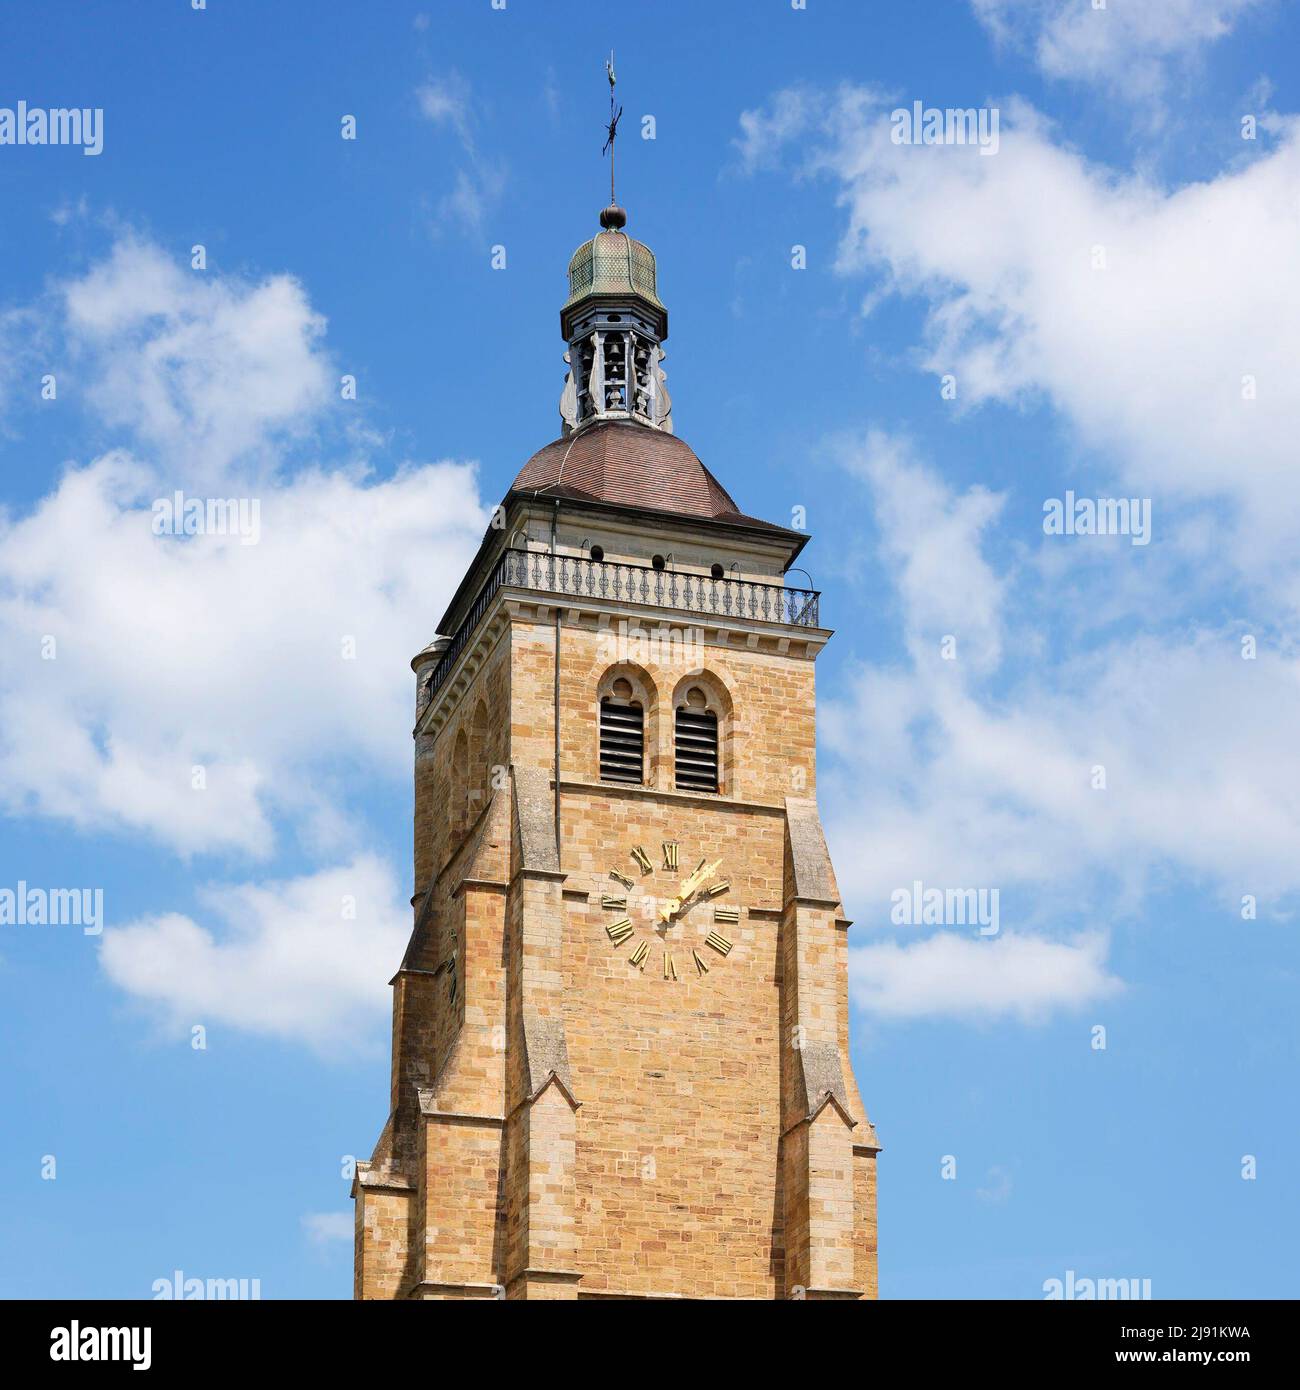 Famous bell tower in Arbois, France, Europe. Stock Photo